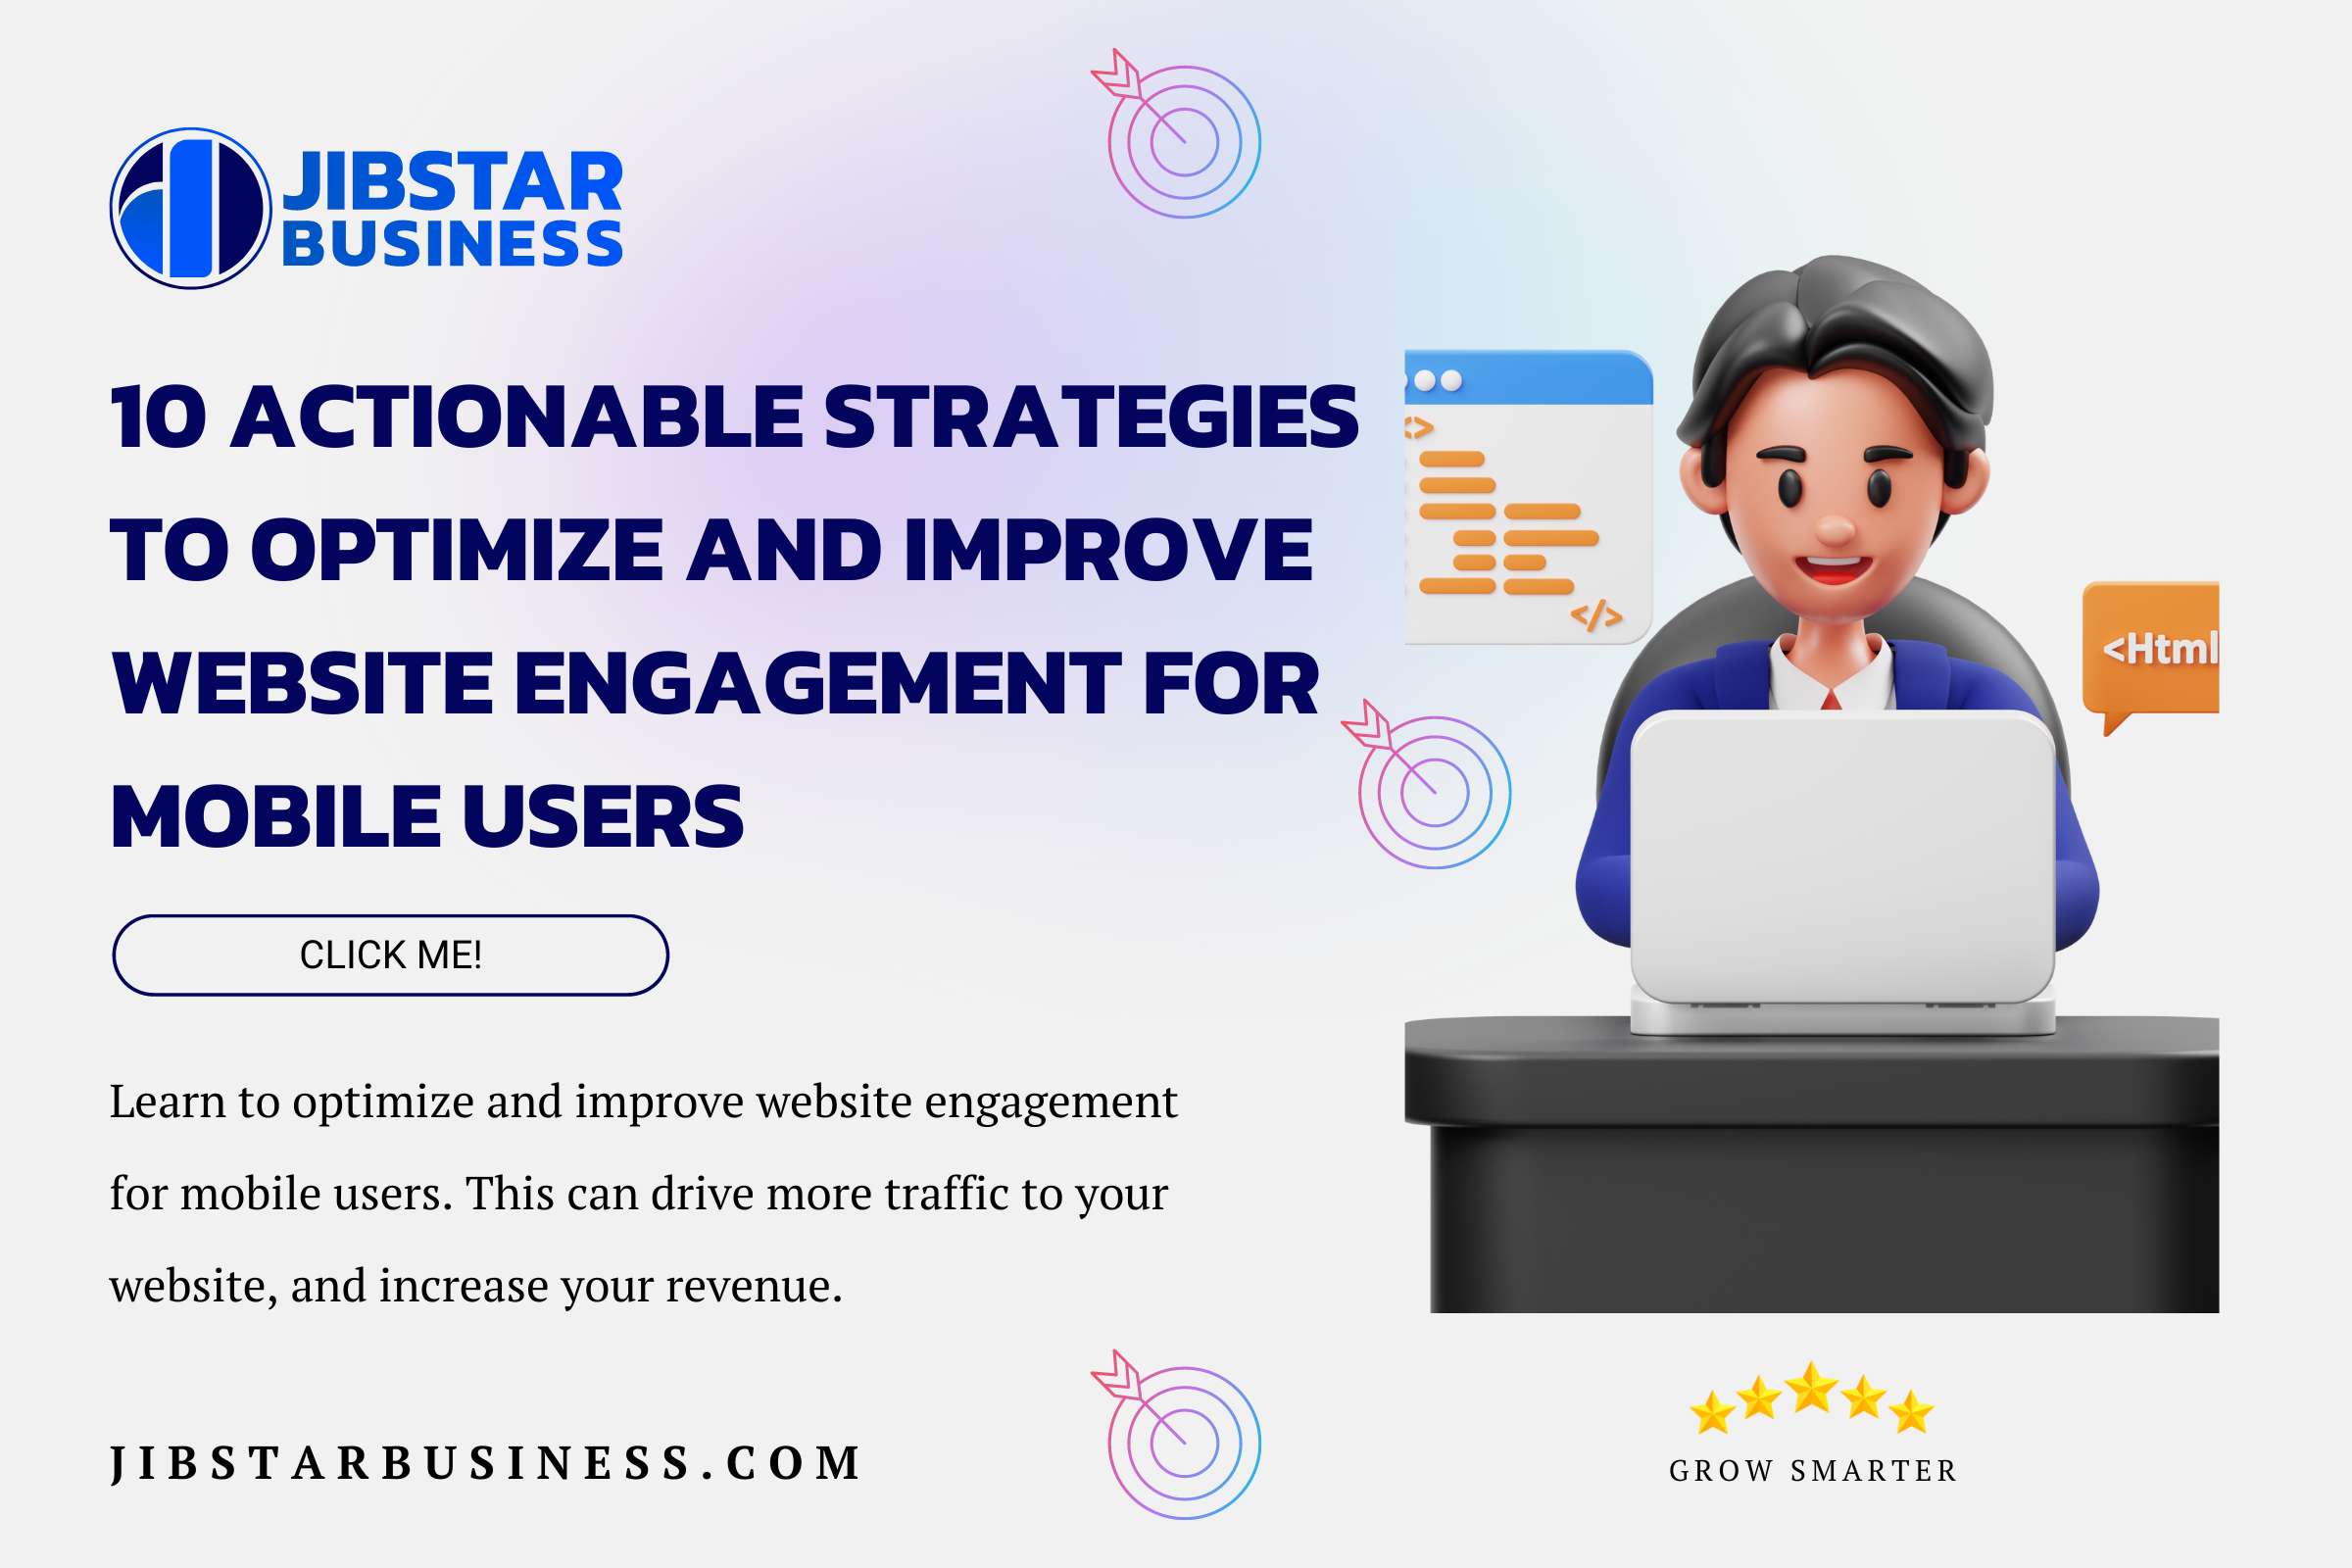 10 Actionable Strategies to Optimize and Improve Website Engagement for Mobile Users-Jibstar Business-Grow Smarter-JSB